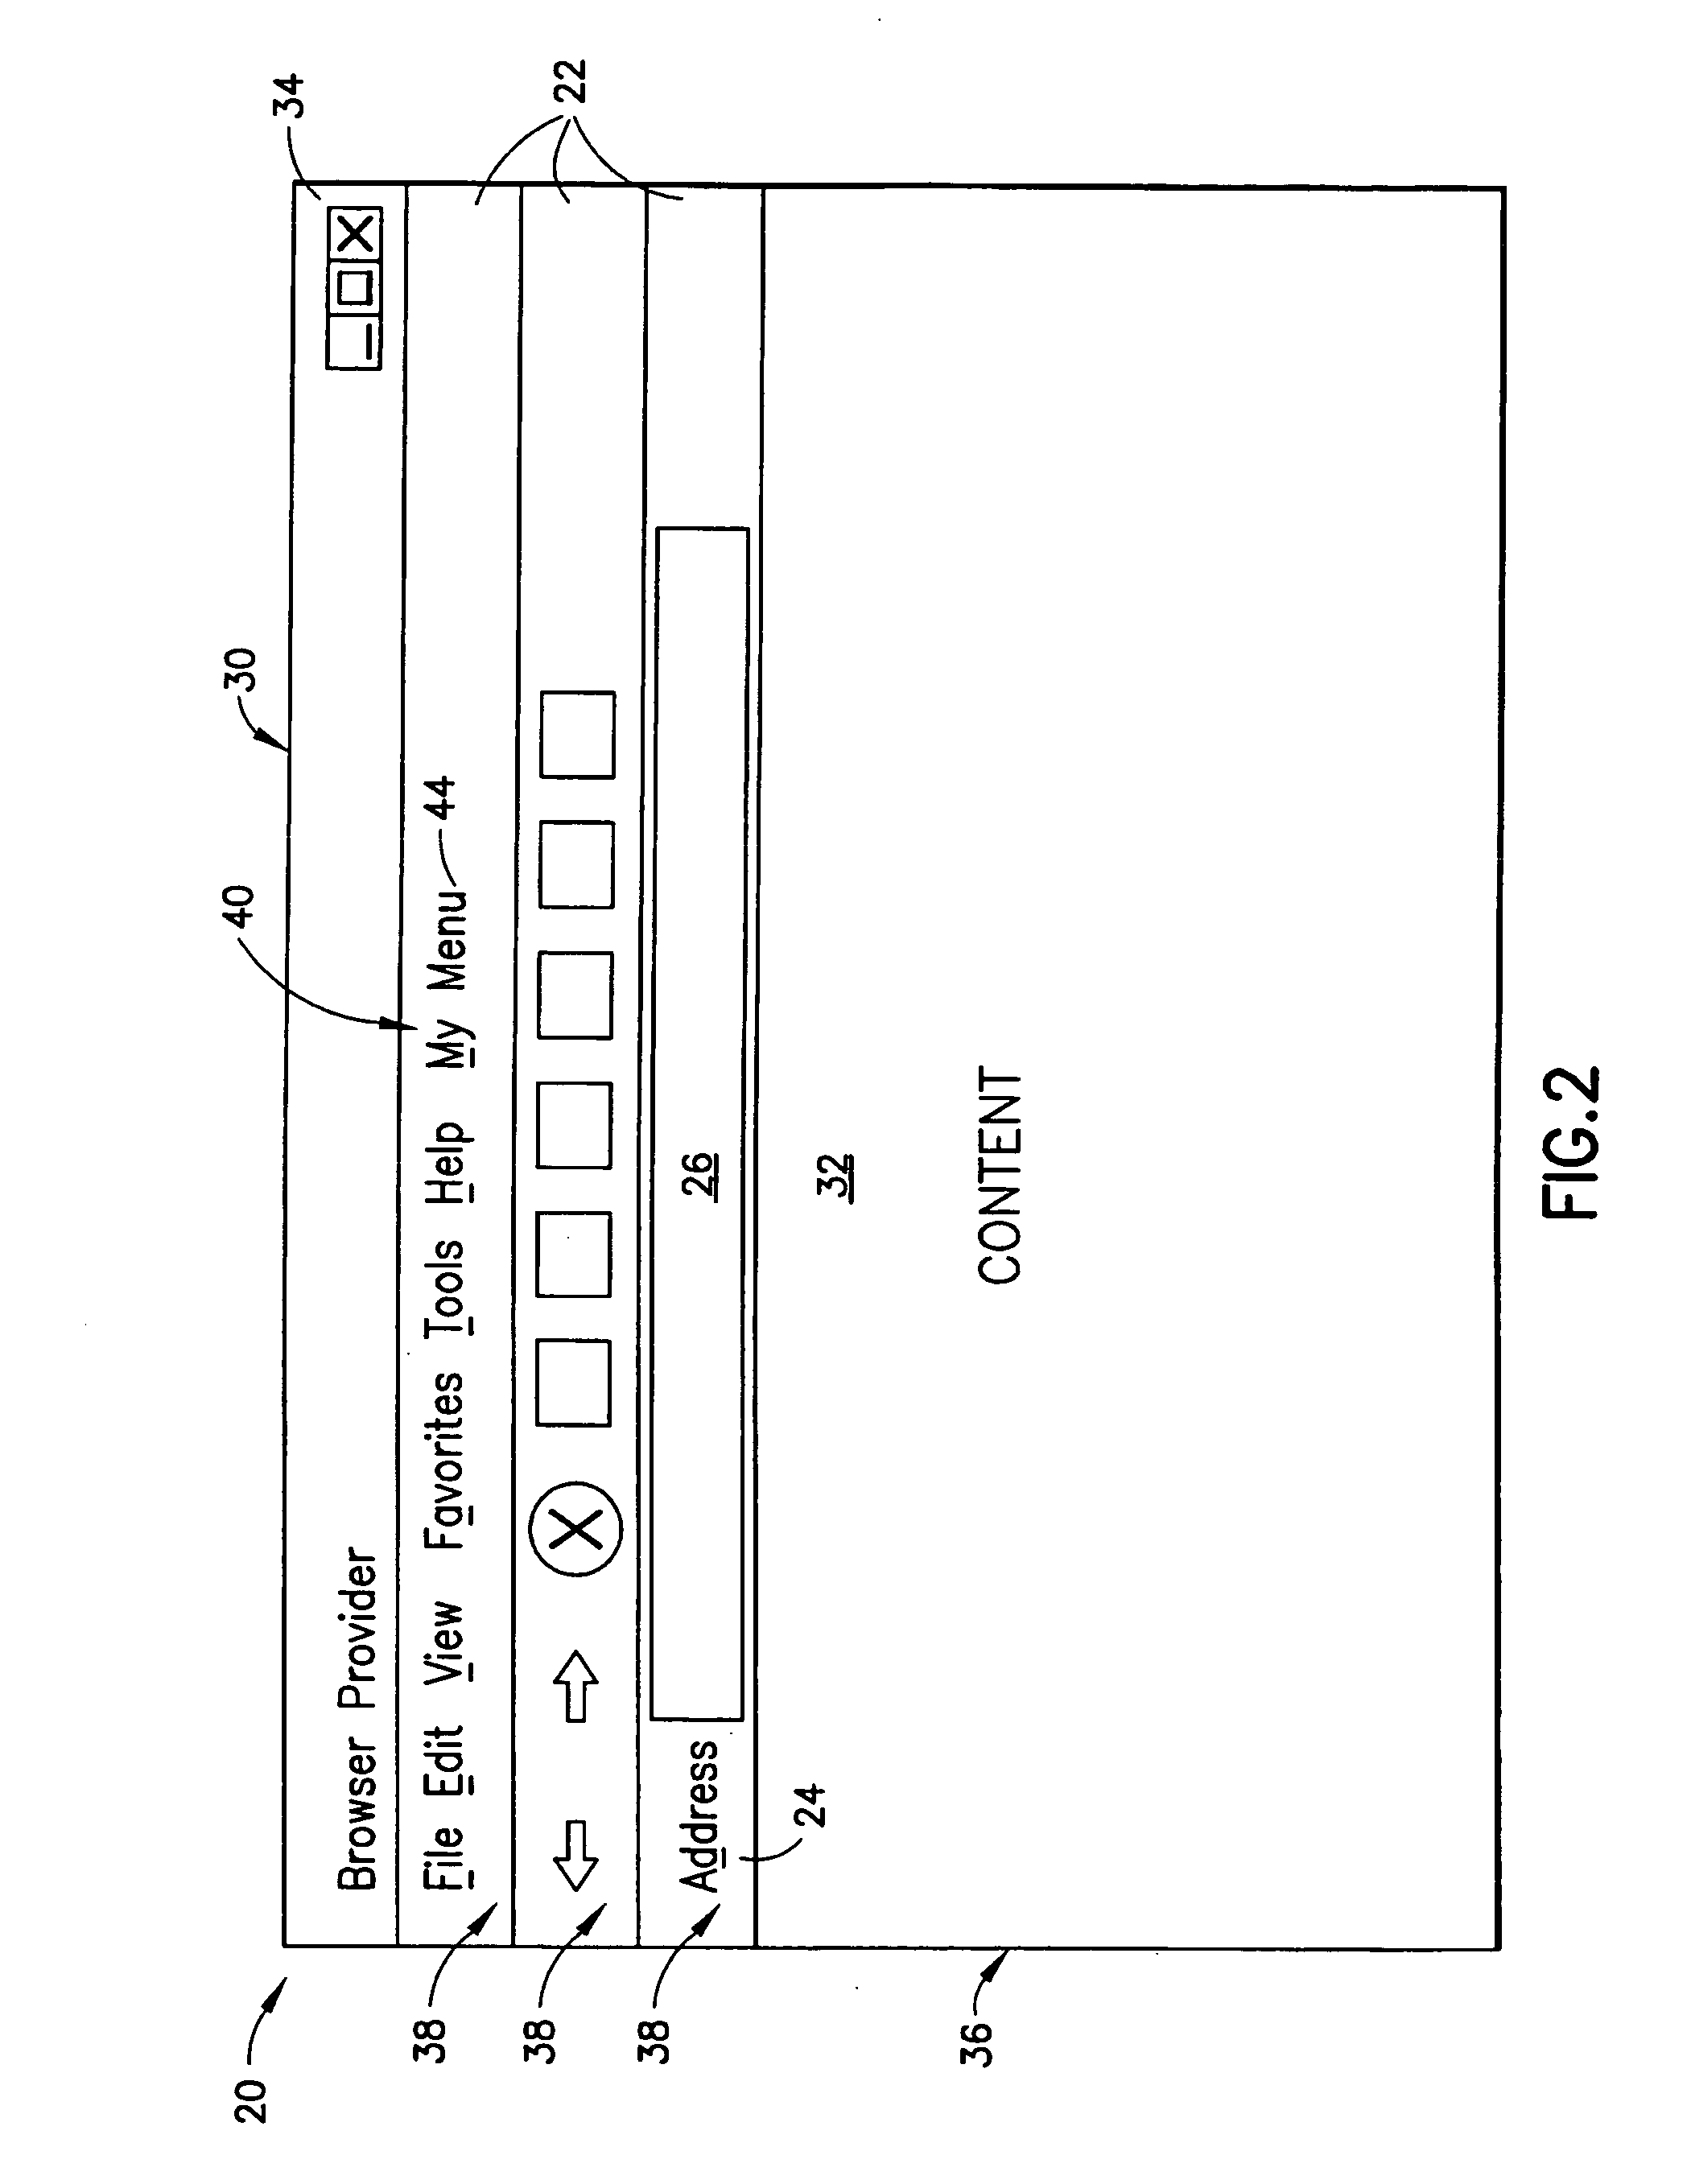 Method and system of facilitating on-line shopping using a dynamically controlled browser interface